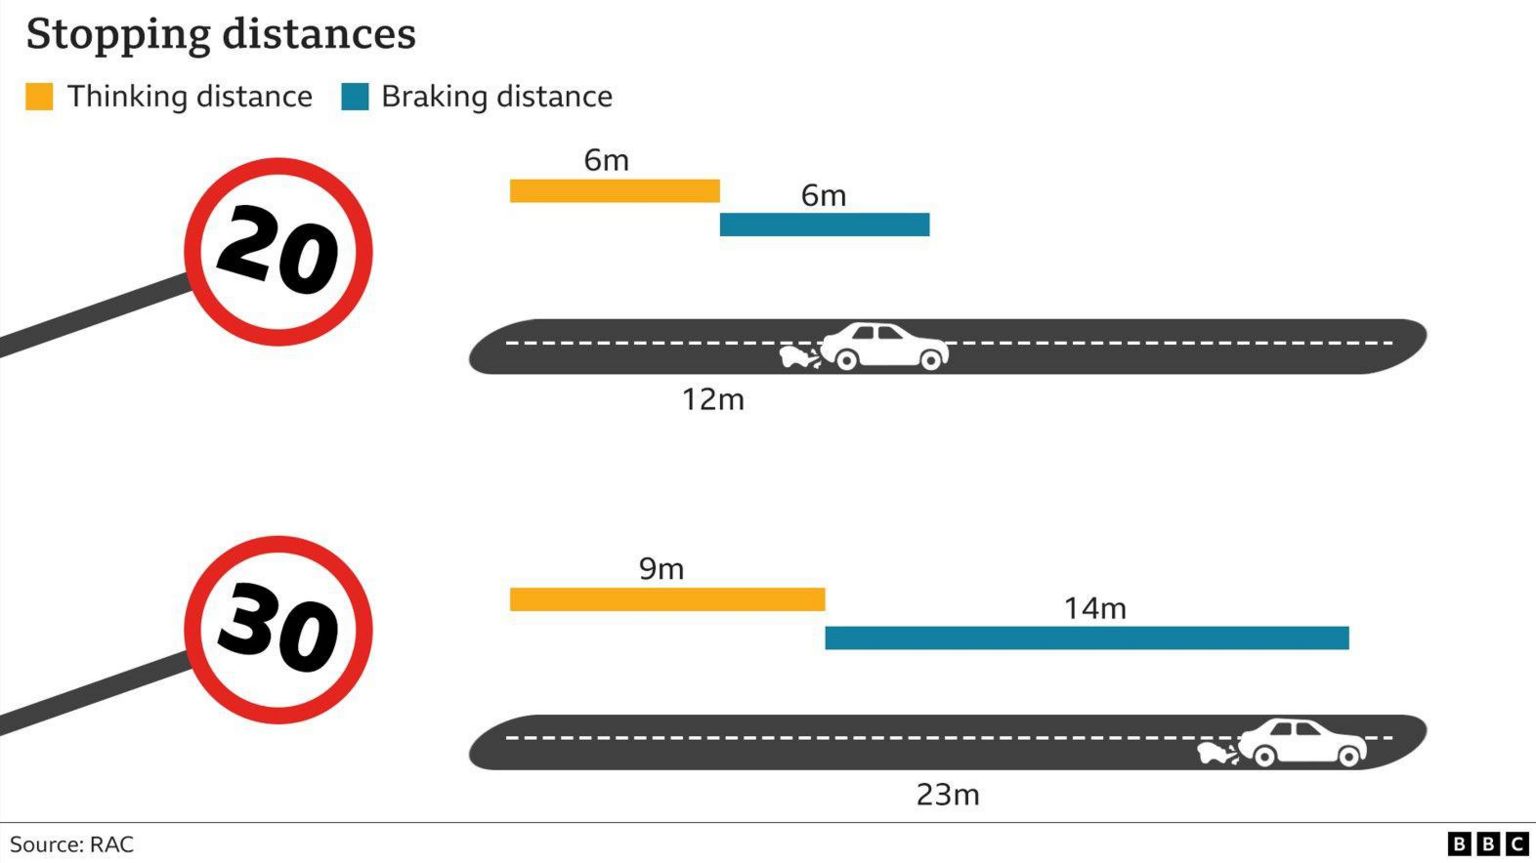 Info graphic showing stopping differences at different speeds